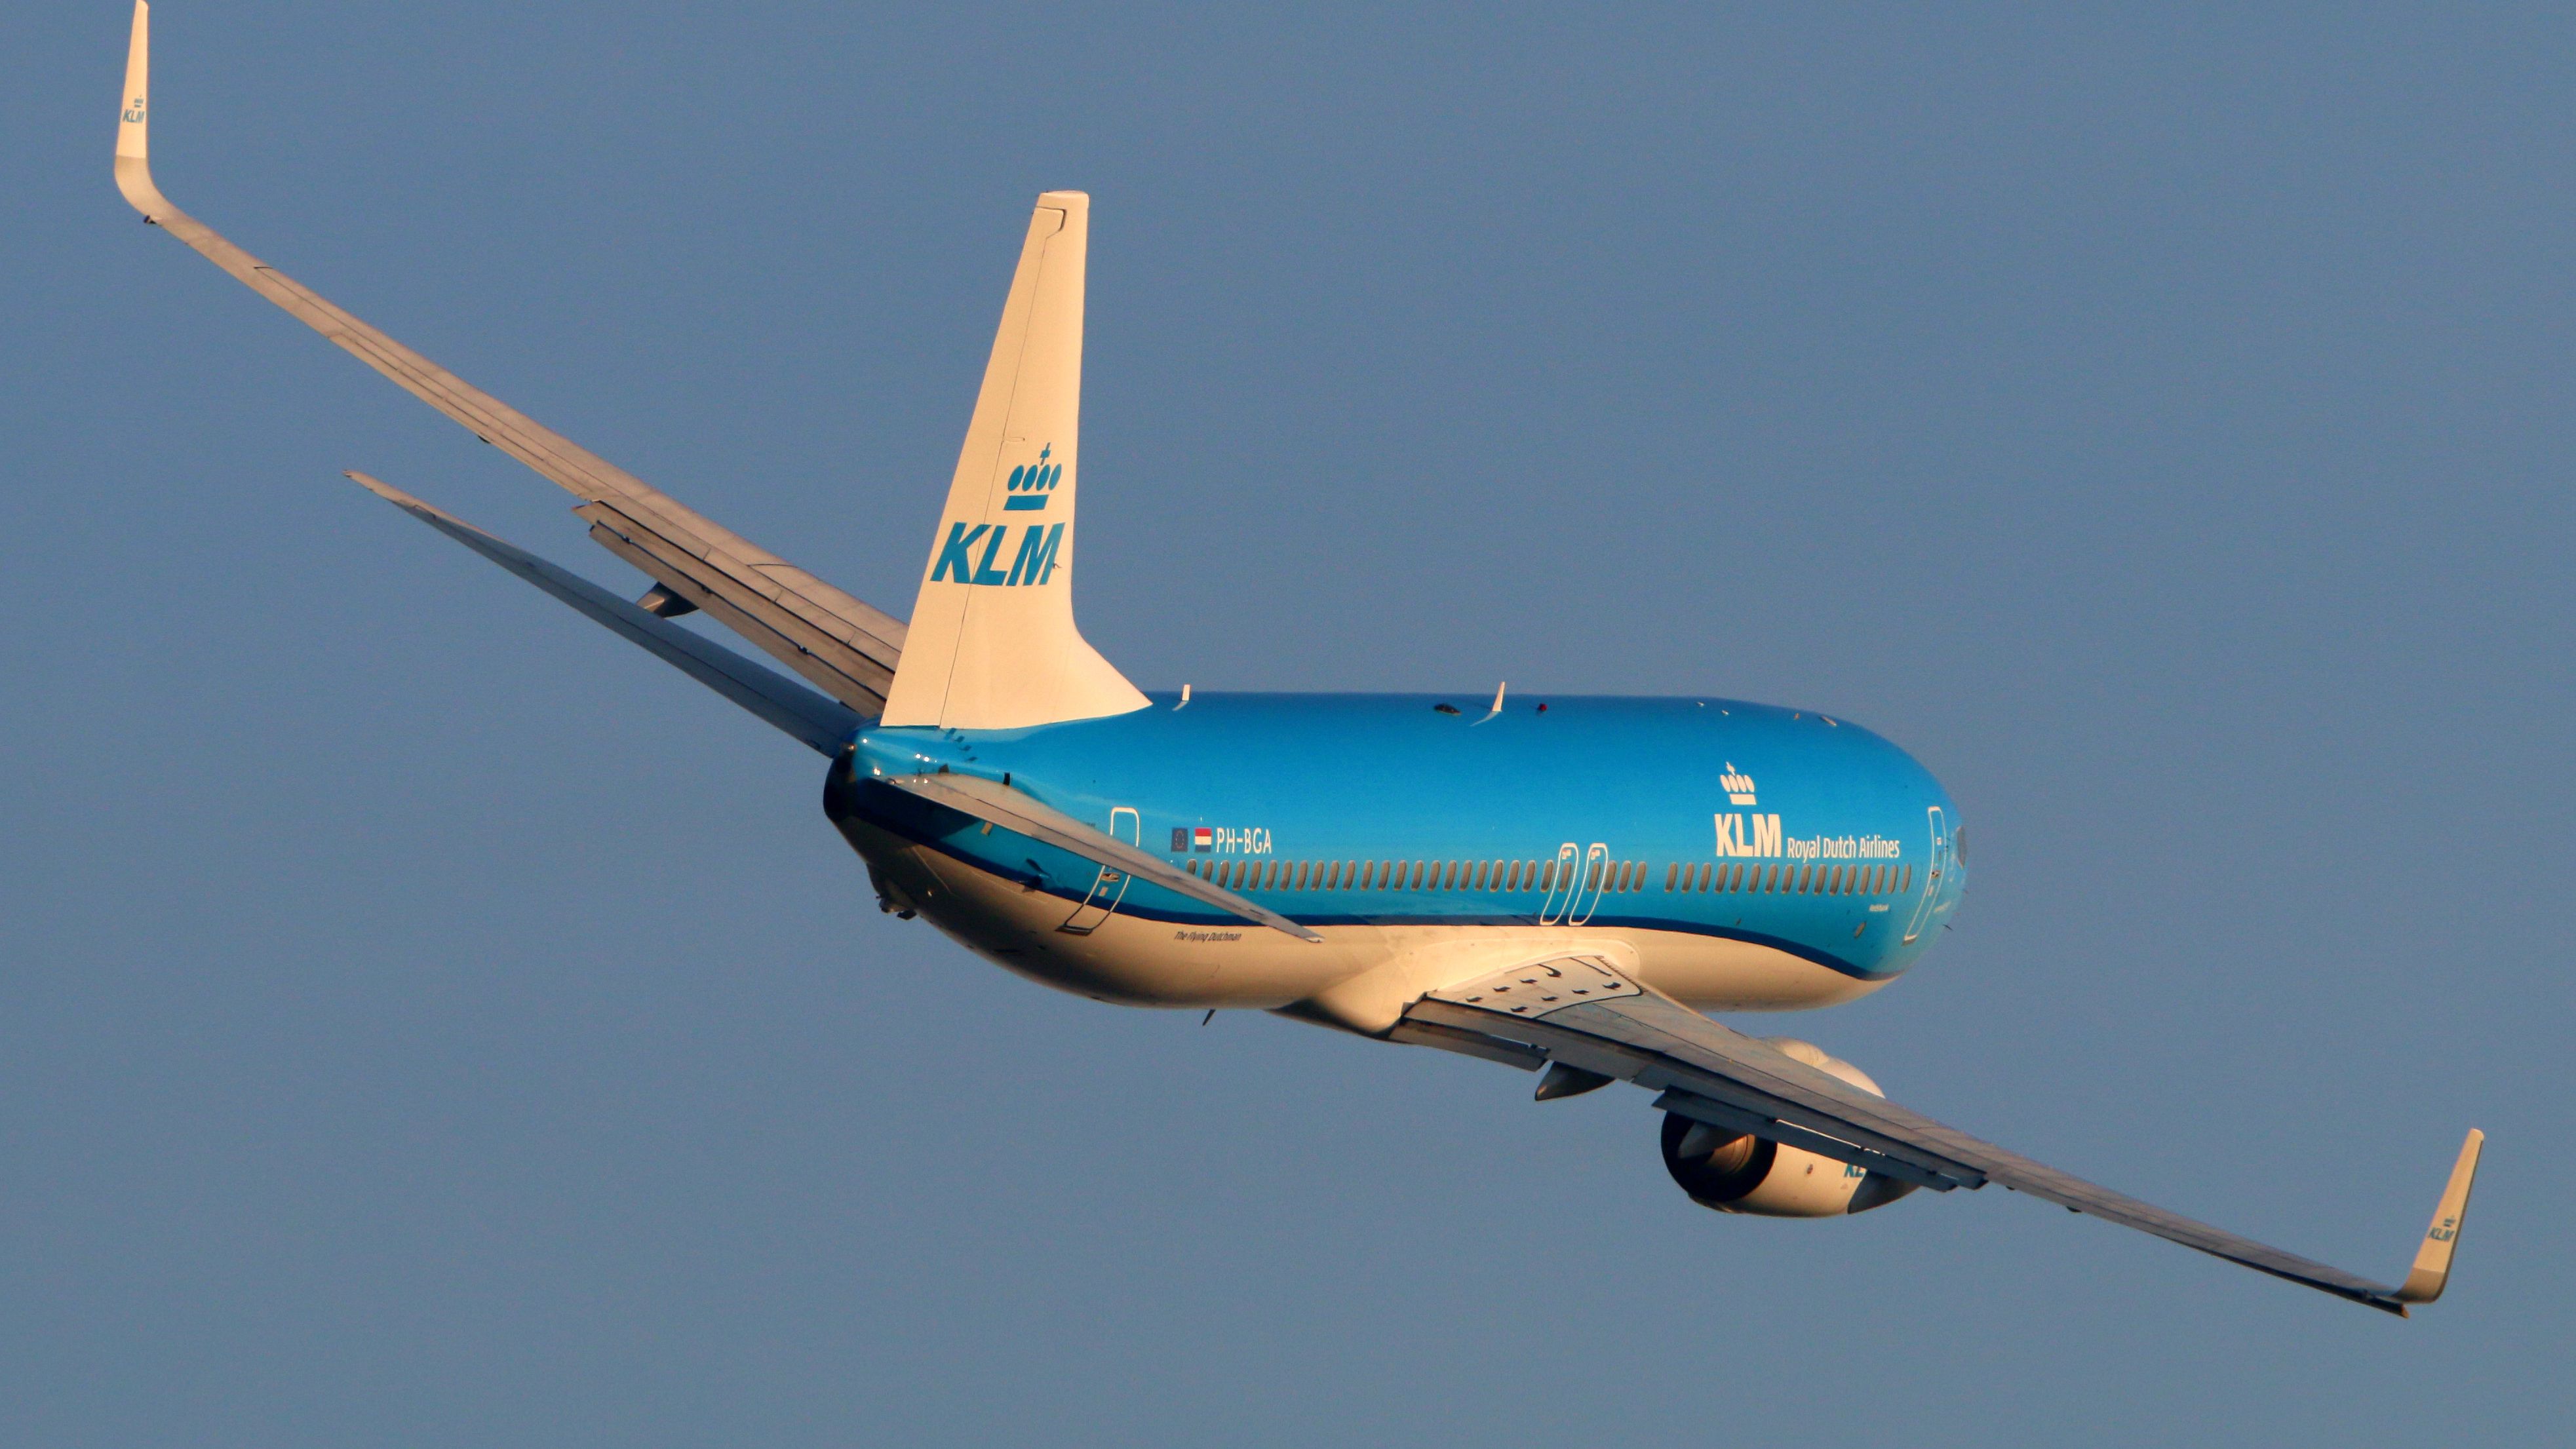 A KLM aircraft making a turn in the sky.